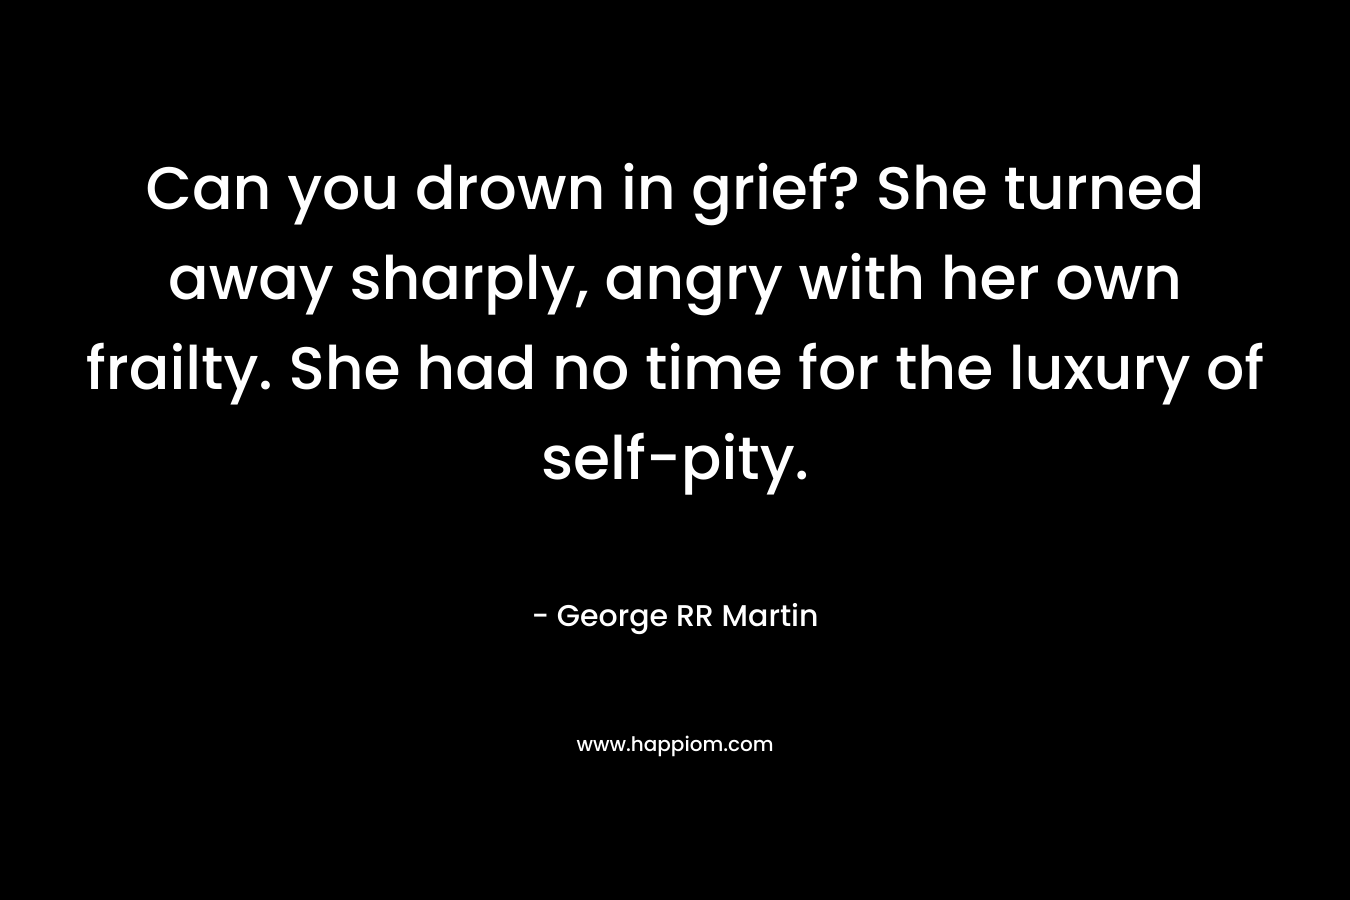 Can you drown in grief? She turned away sharply, angry with her own frailty. She had no time for the luxury of self-pity. – George RR Martin